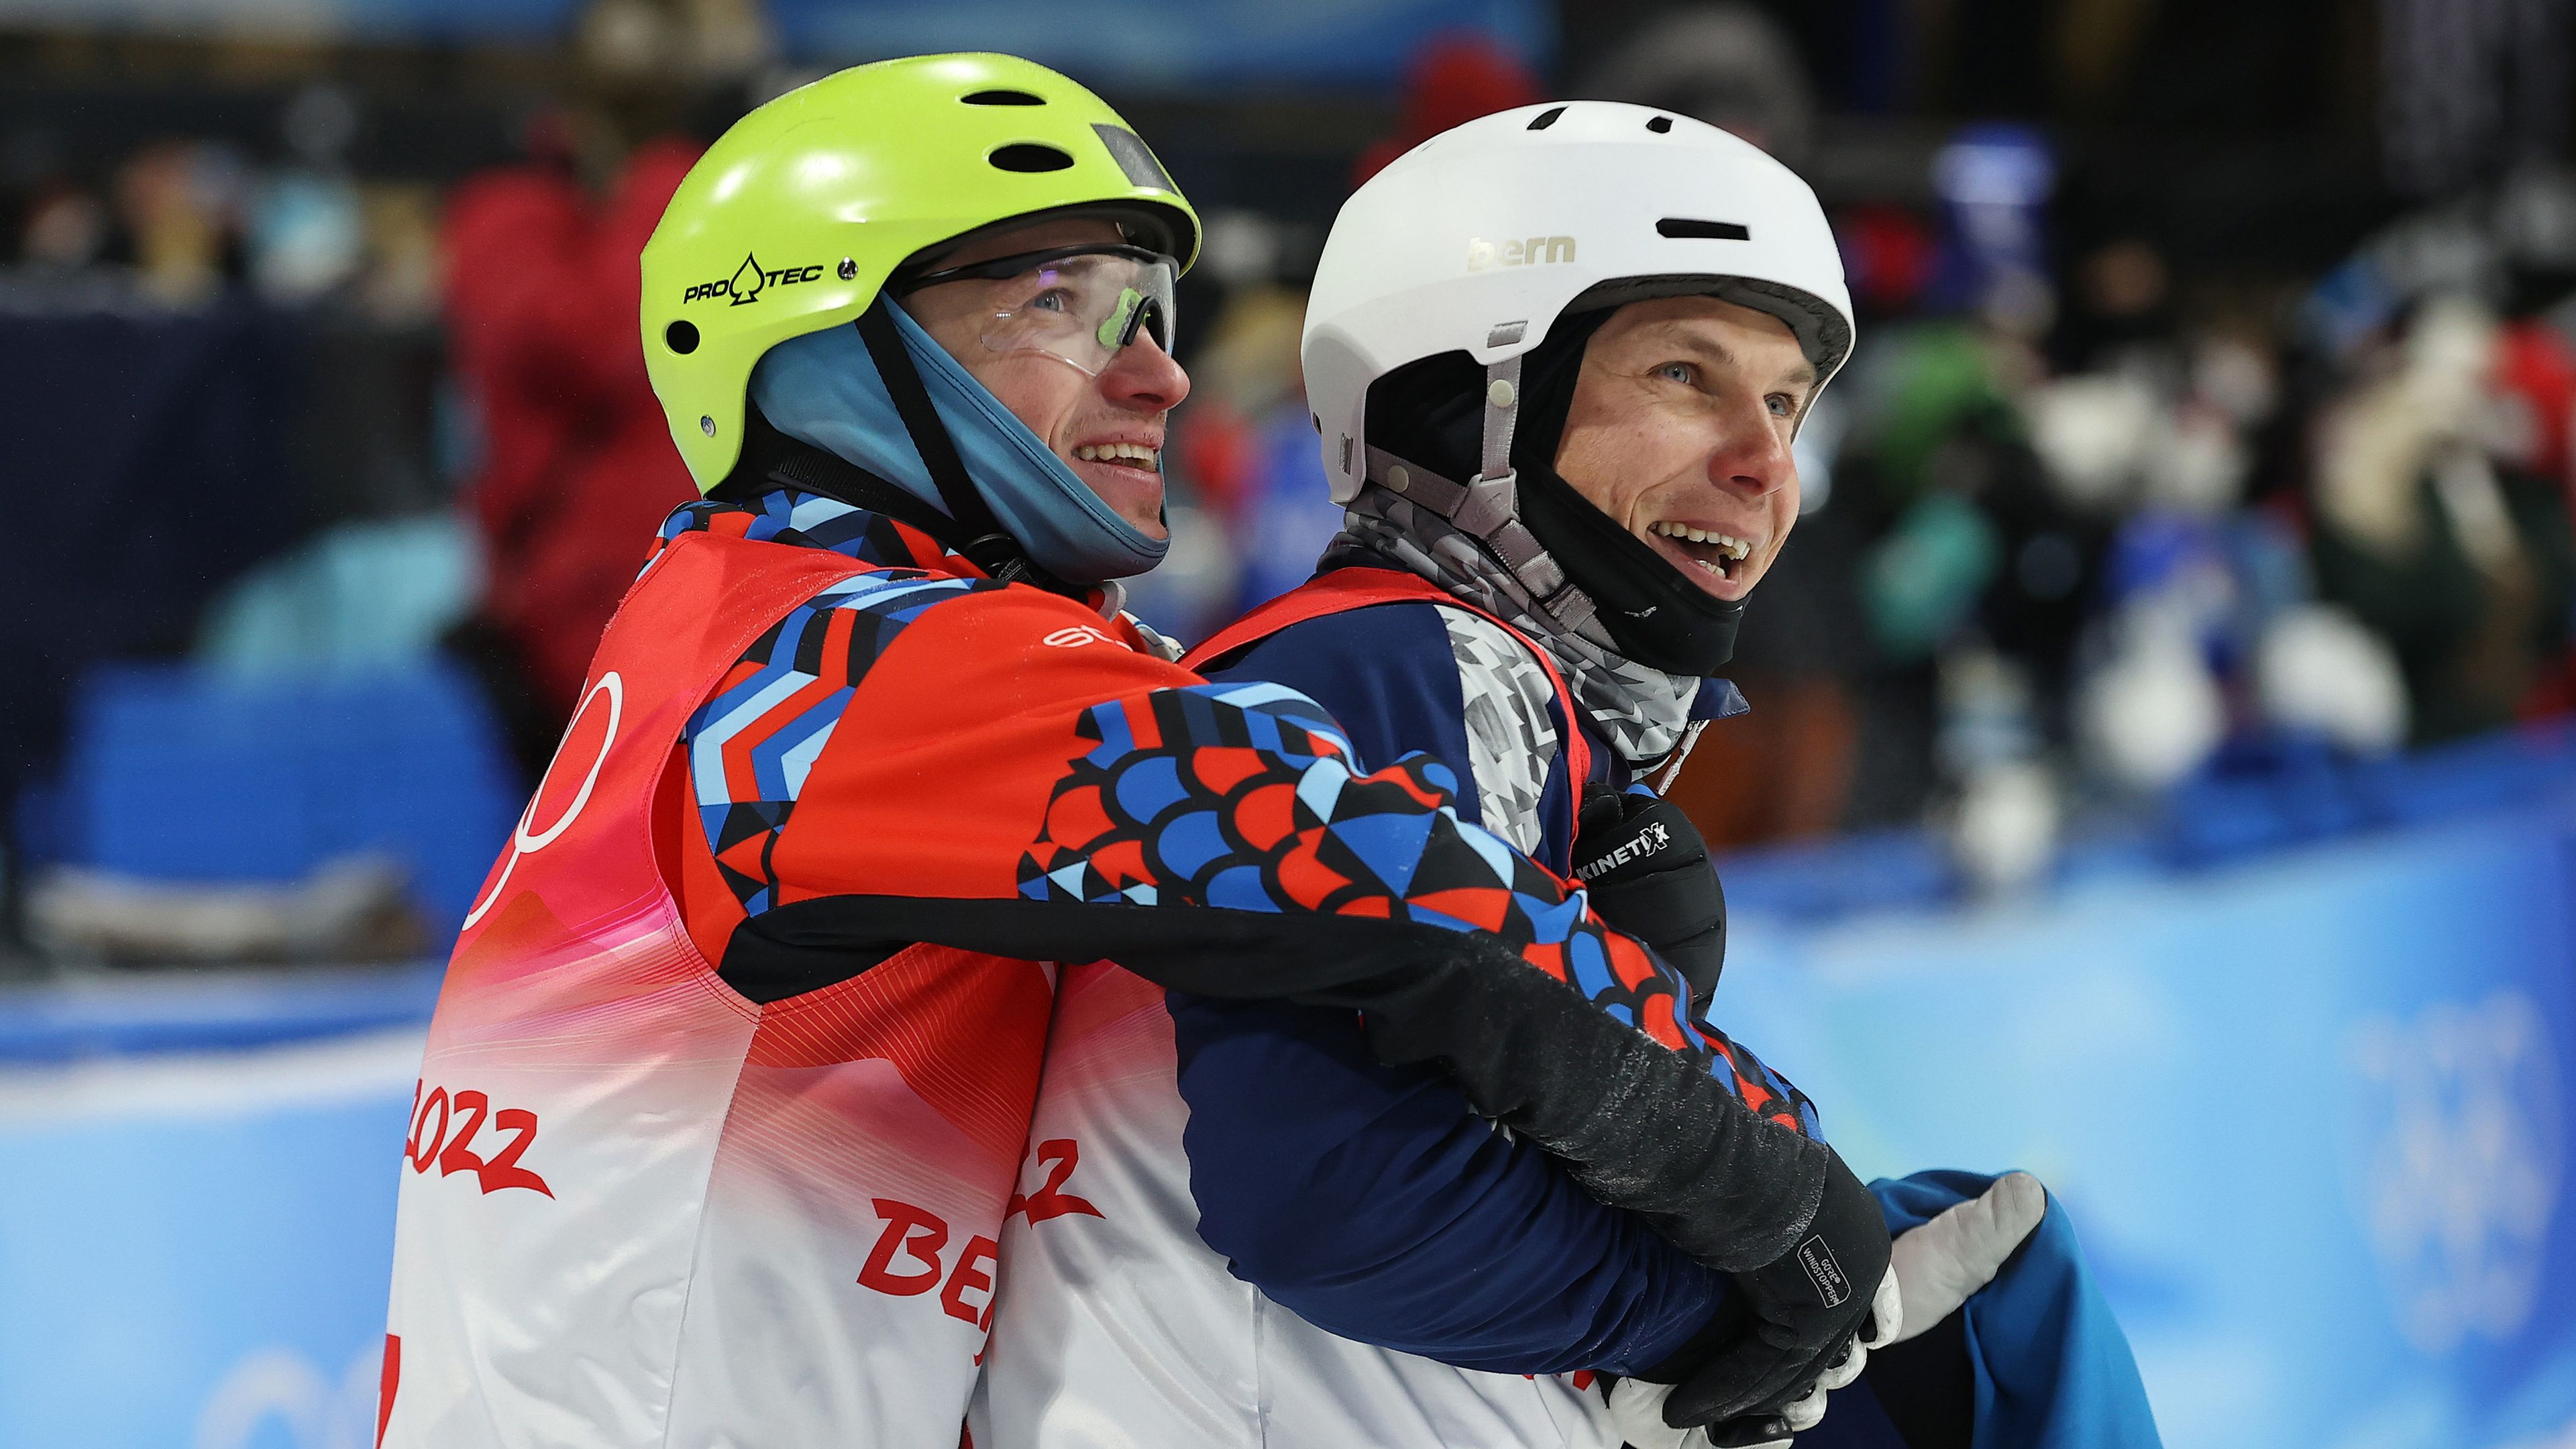 Nations at odds, but rival Olympians find time for special moment